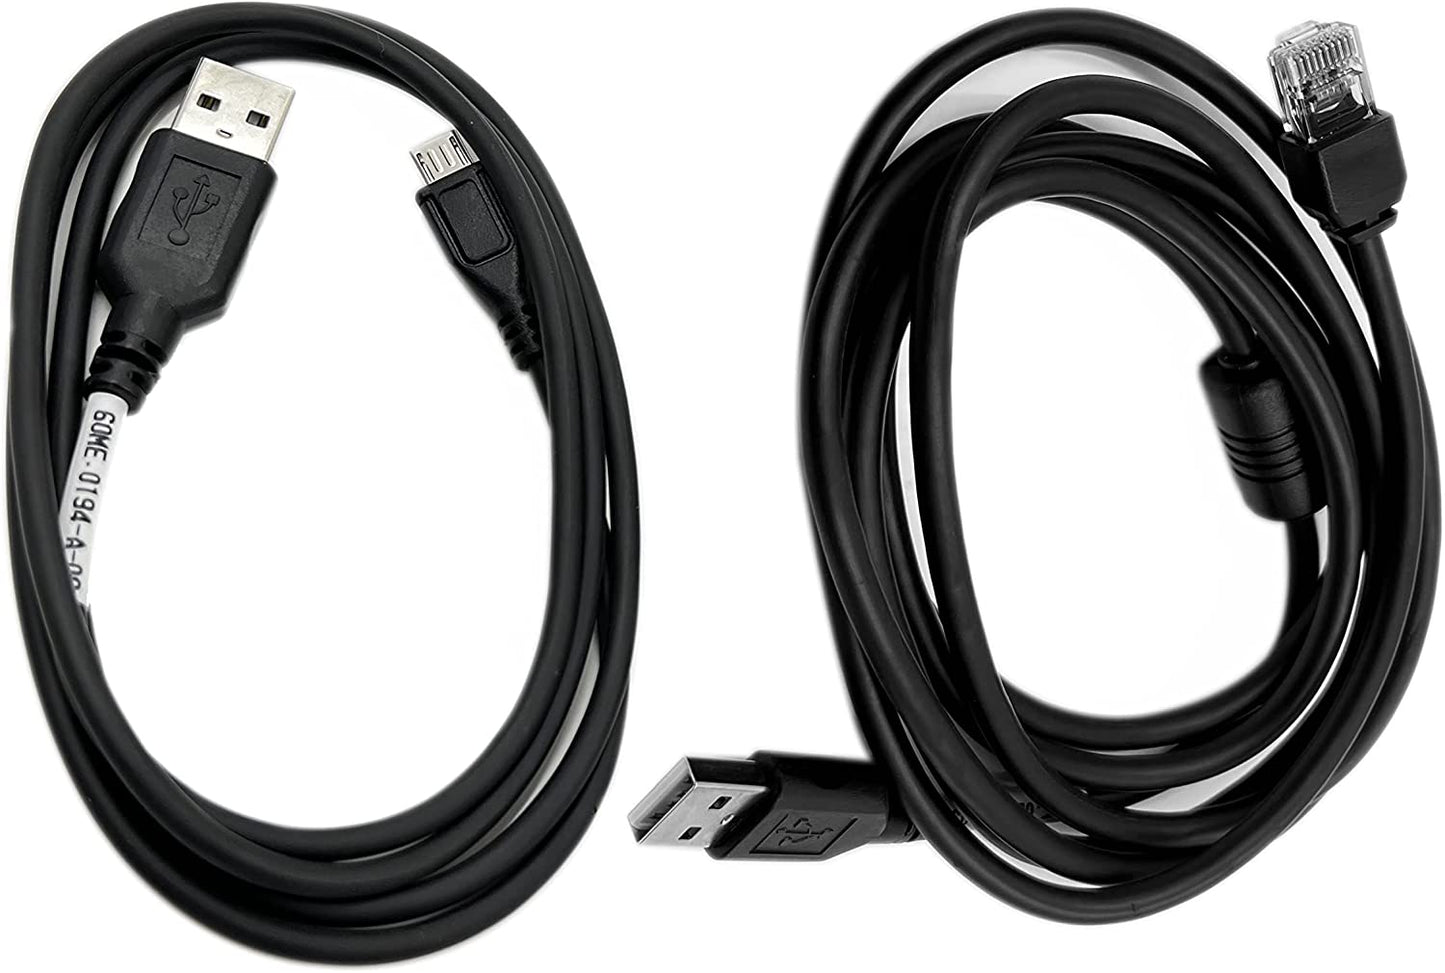 TEEMI Replacement USB Charging Cable and USB to RJ45 Cable for TMSL-55CR TMSL-56CR TMSL-57CR Scanner and USB Cradle